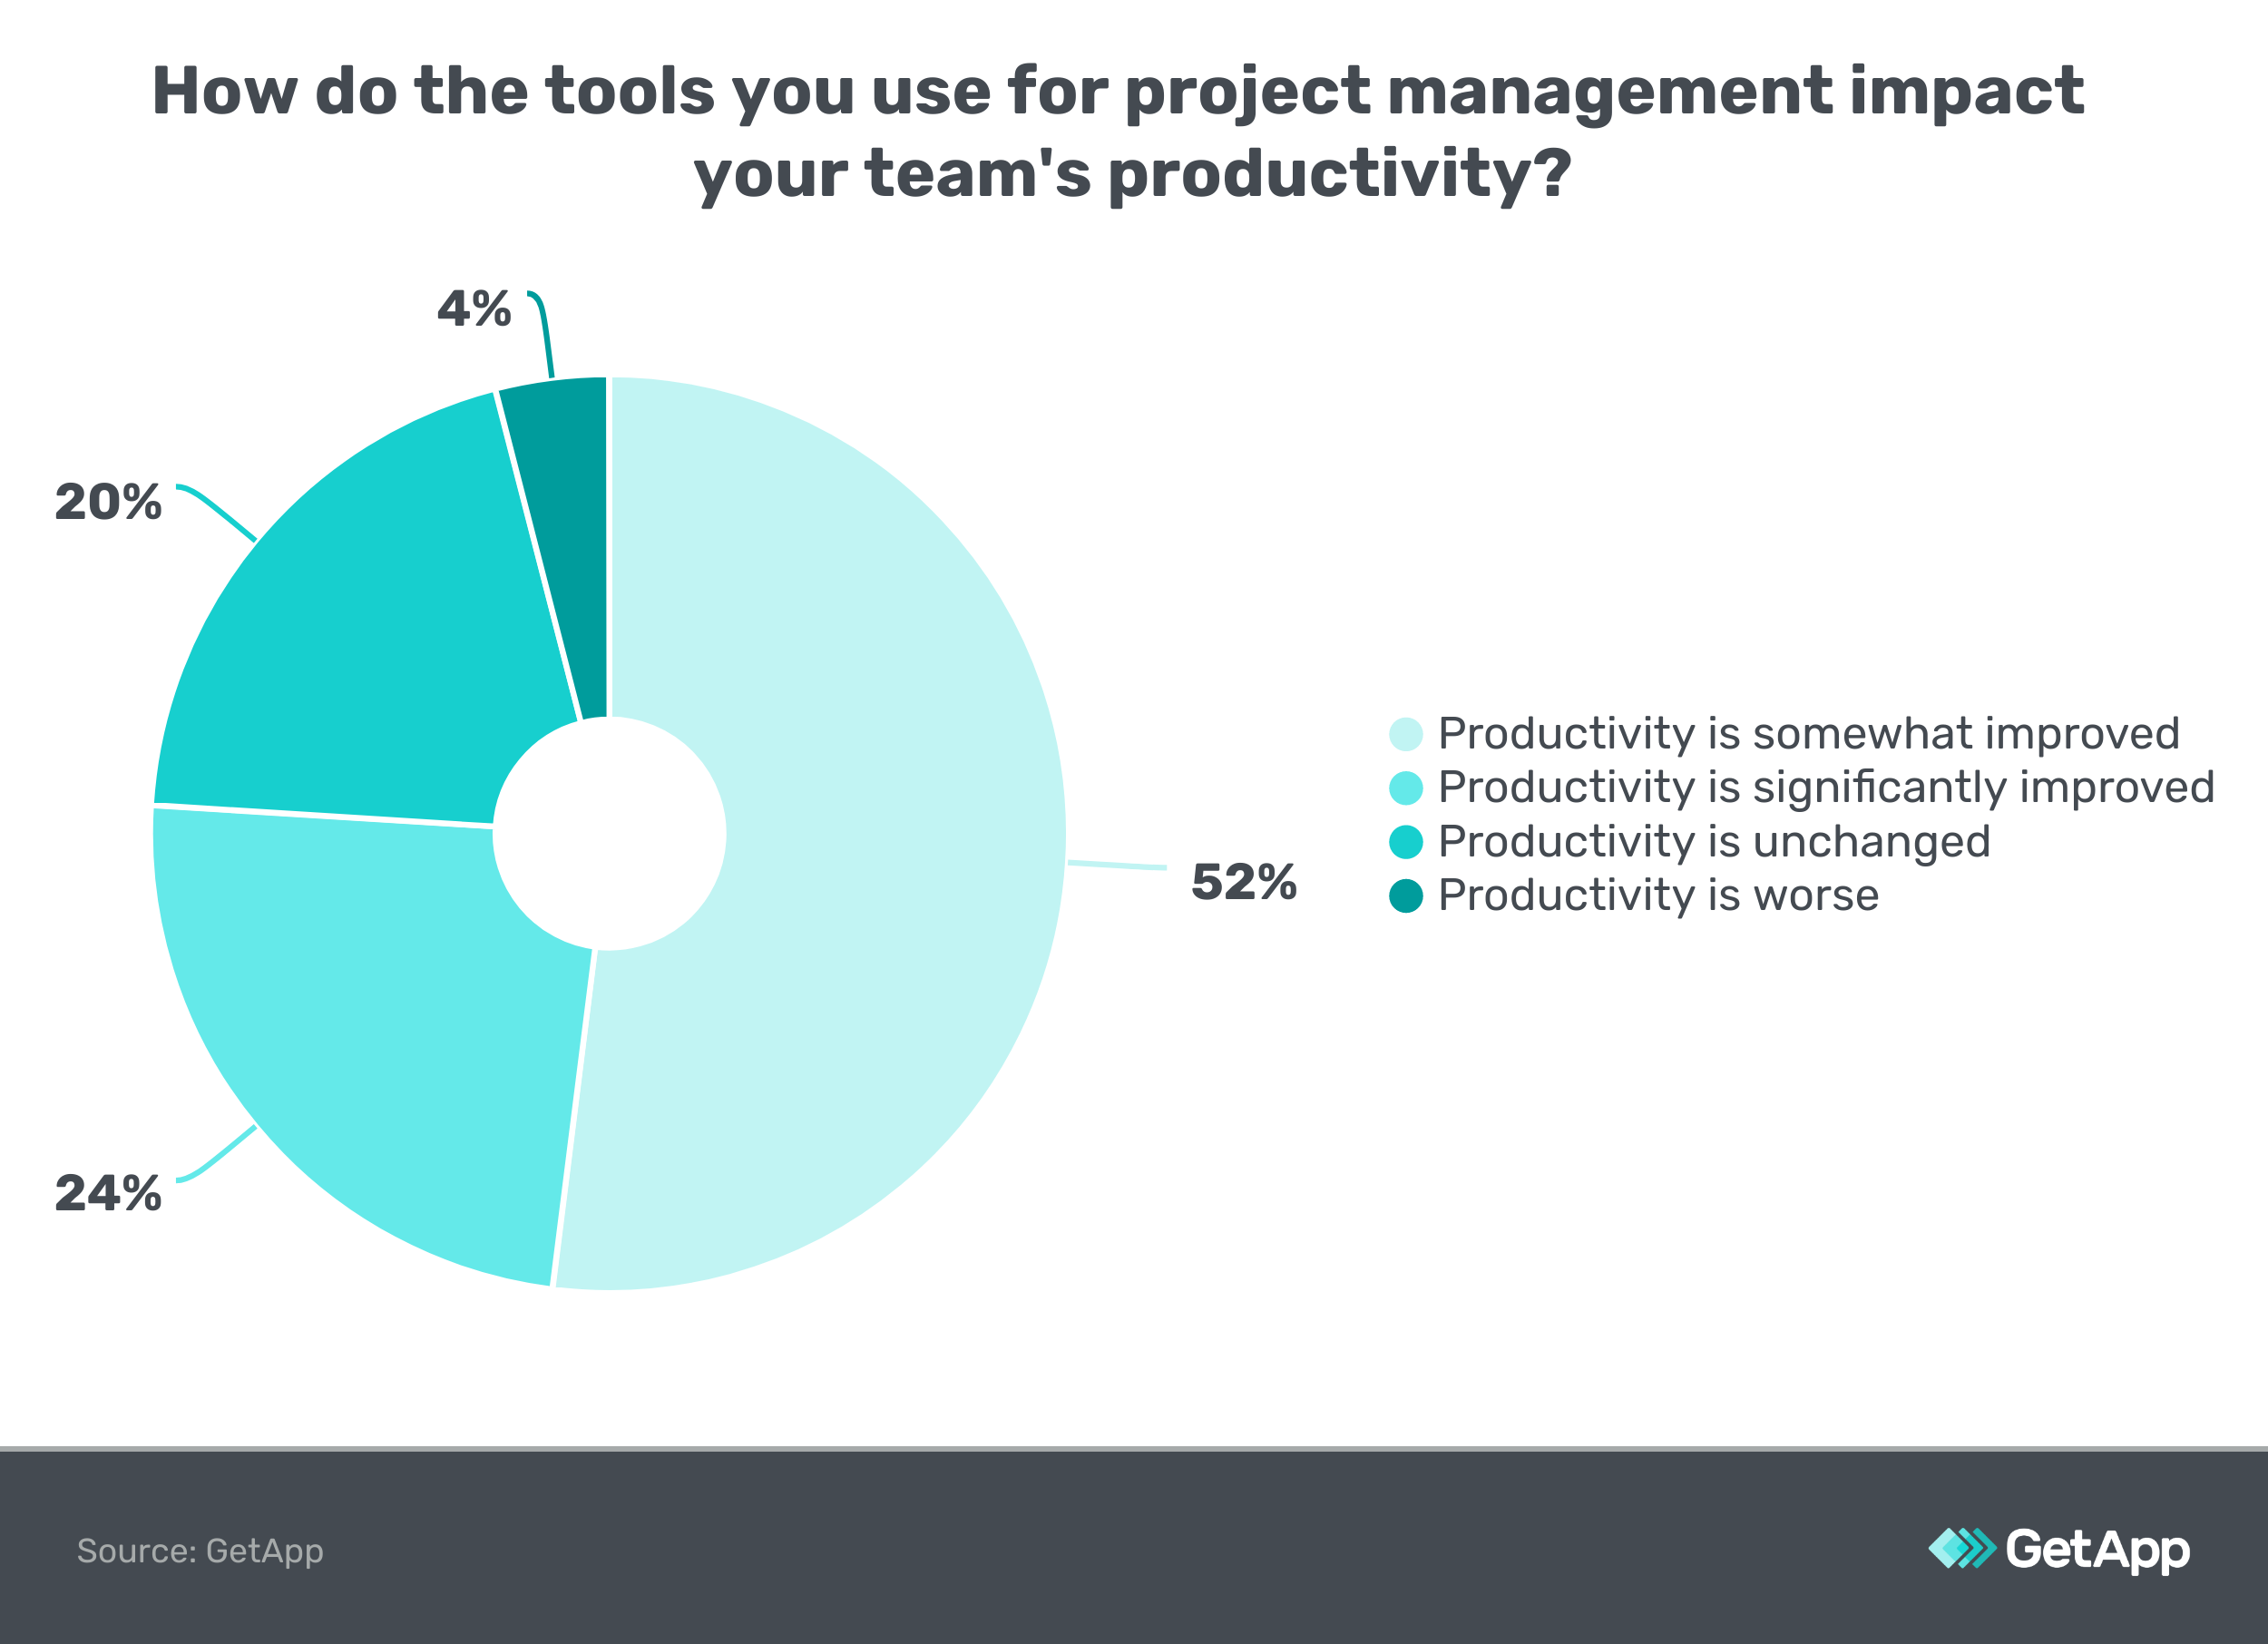 How do the tools you use impact productivity?